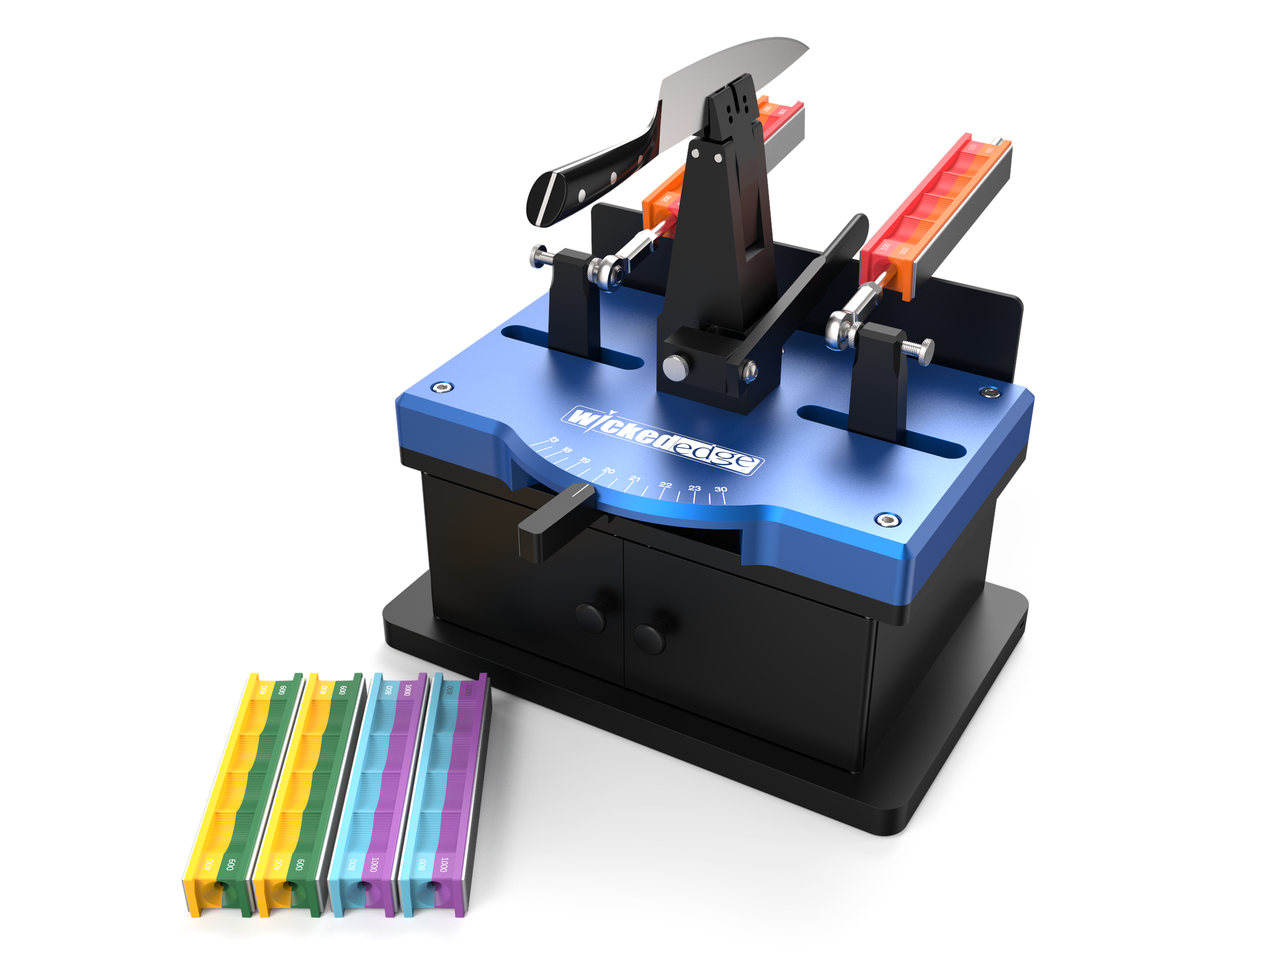 Wicked Edge: Precision Sharpening System - Generation 3 Pro